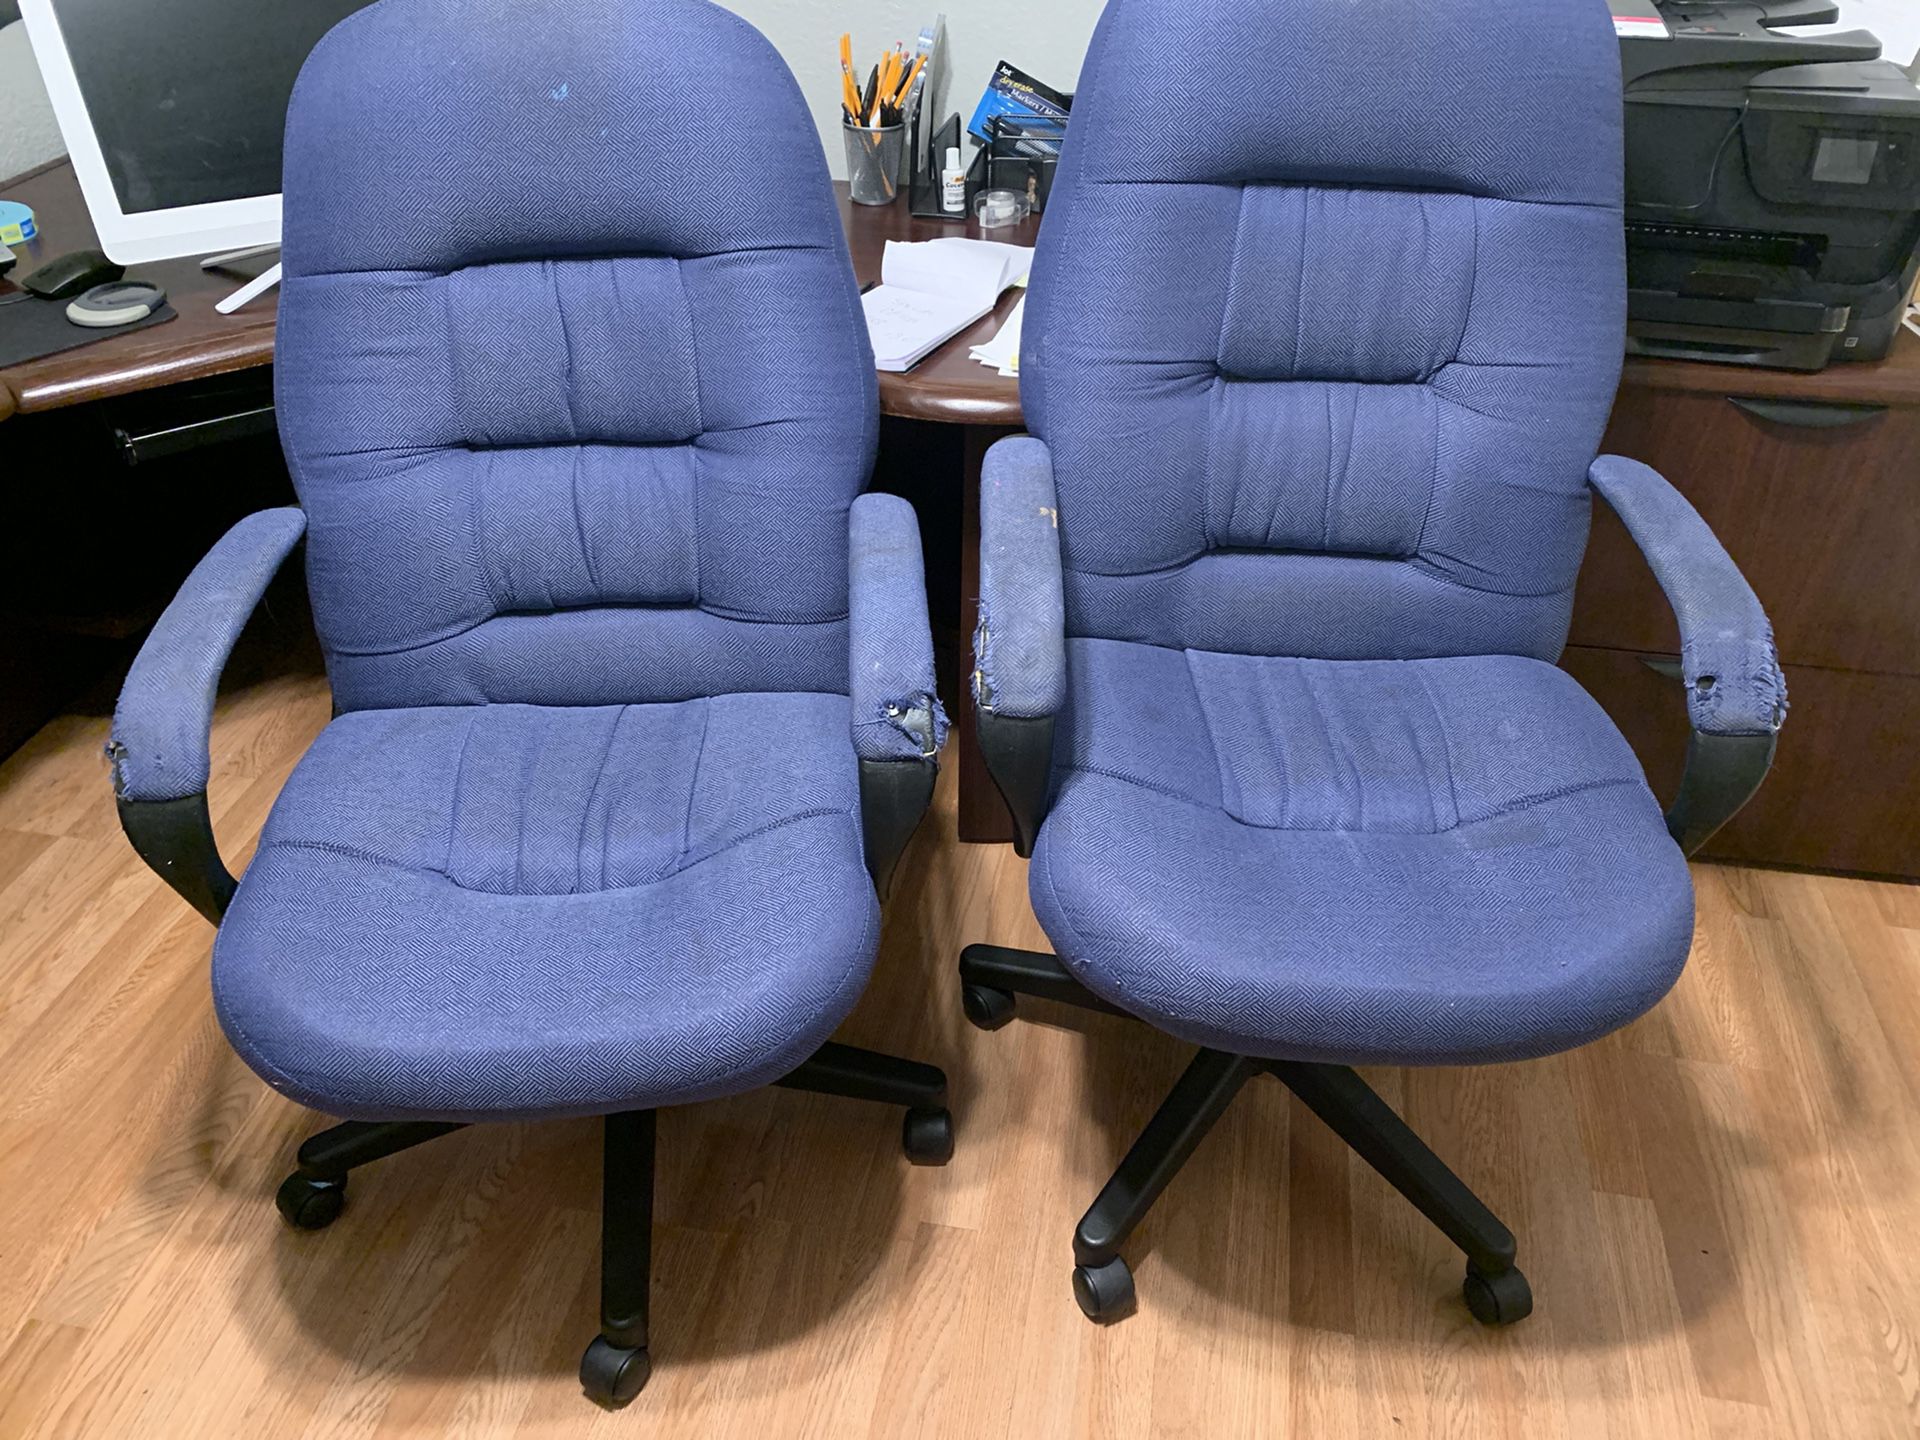 Matching rolling office chairs need some TLC both for 25 or best offer